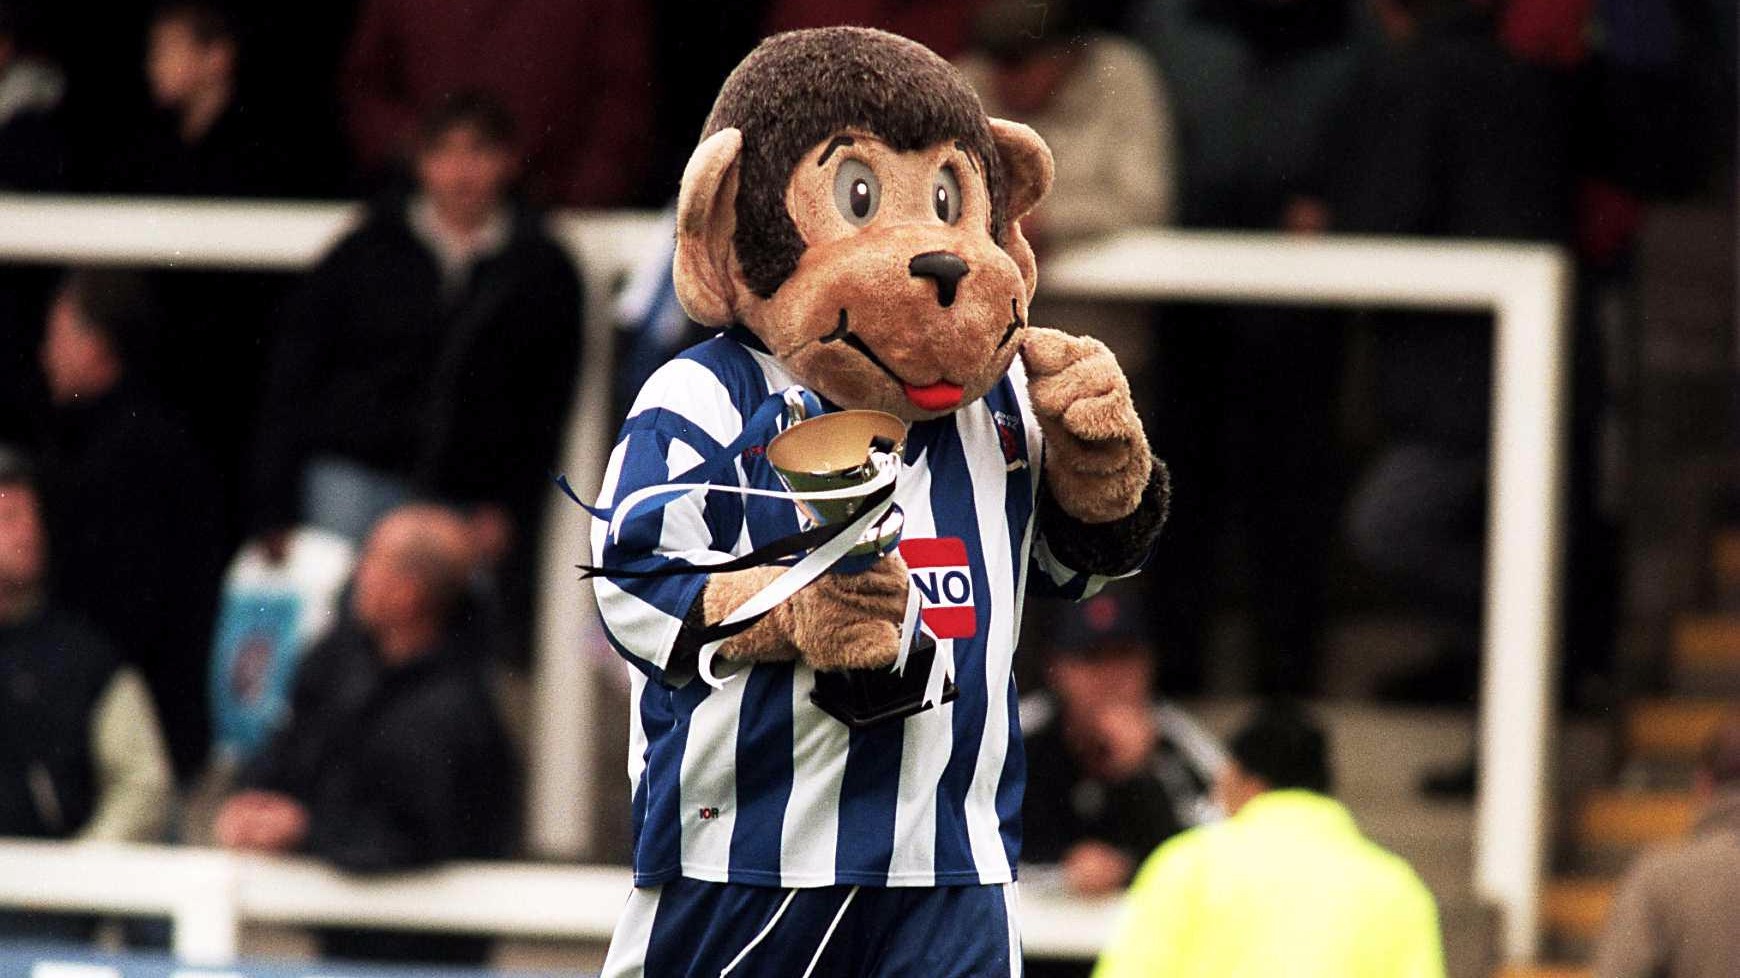 Southend United FC Exiles - Altrincham have a Robin mascot. I don't know  its name though.